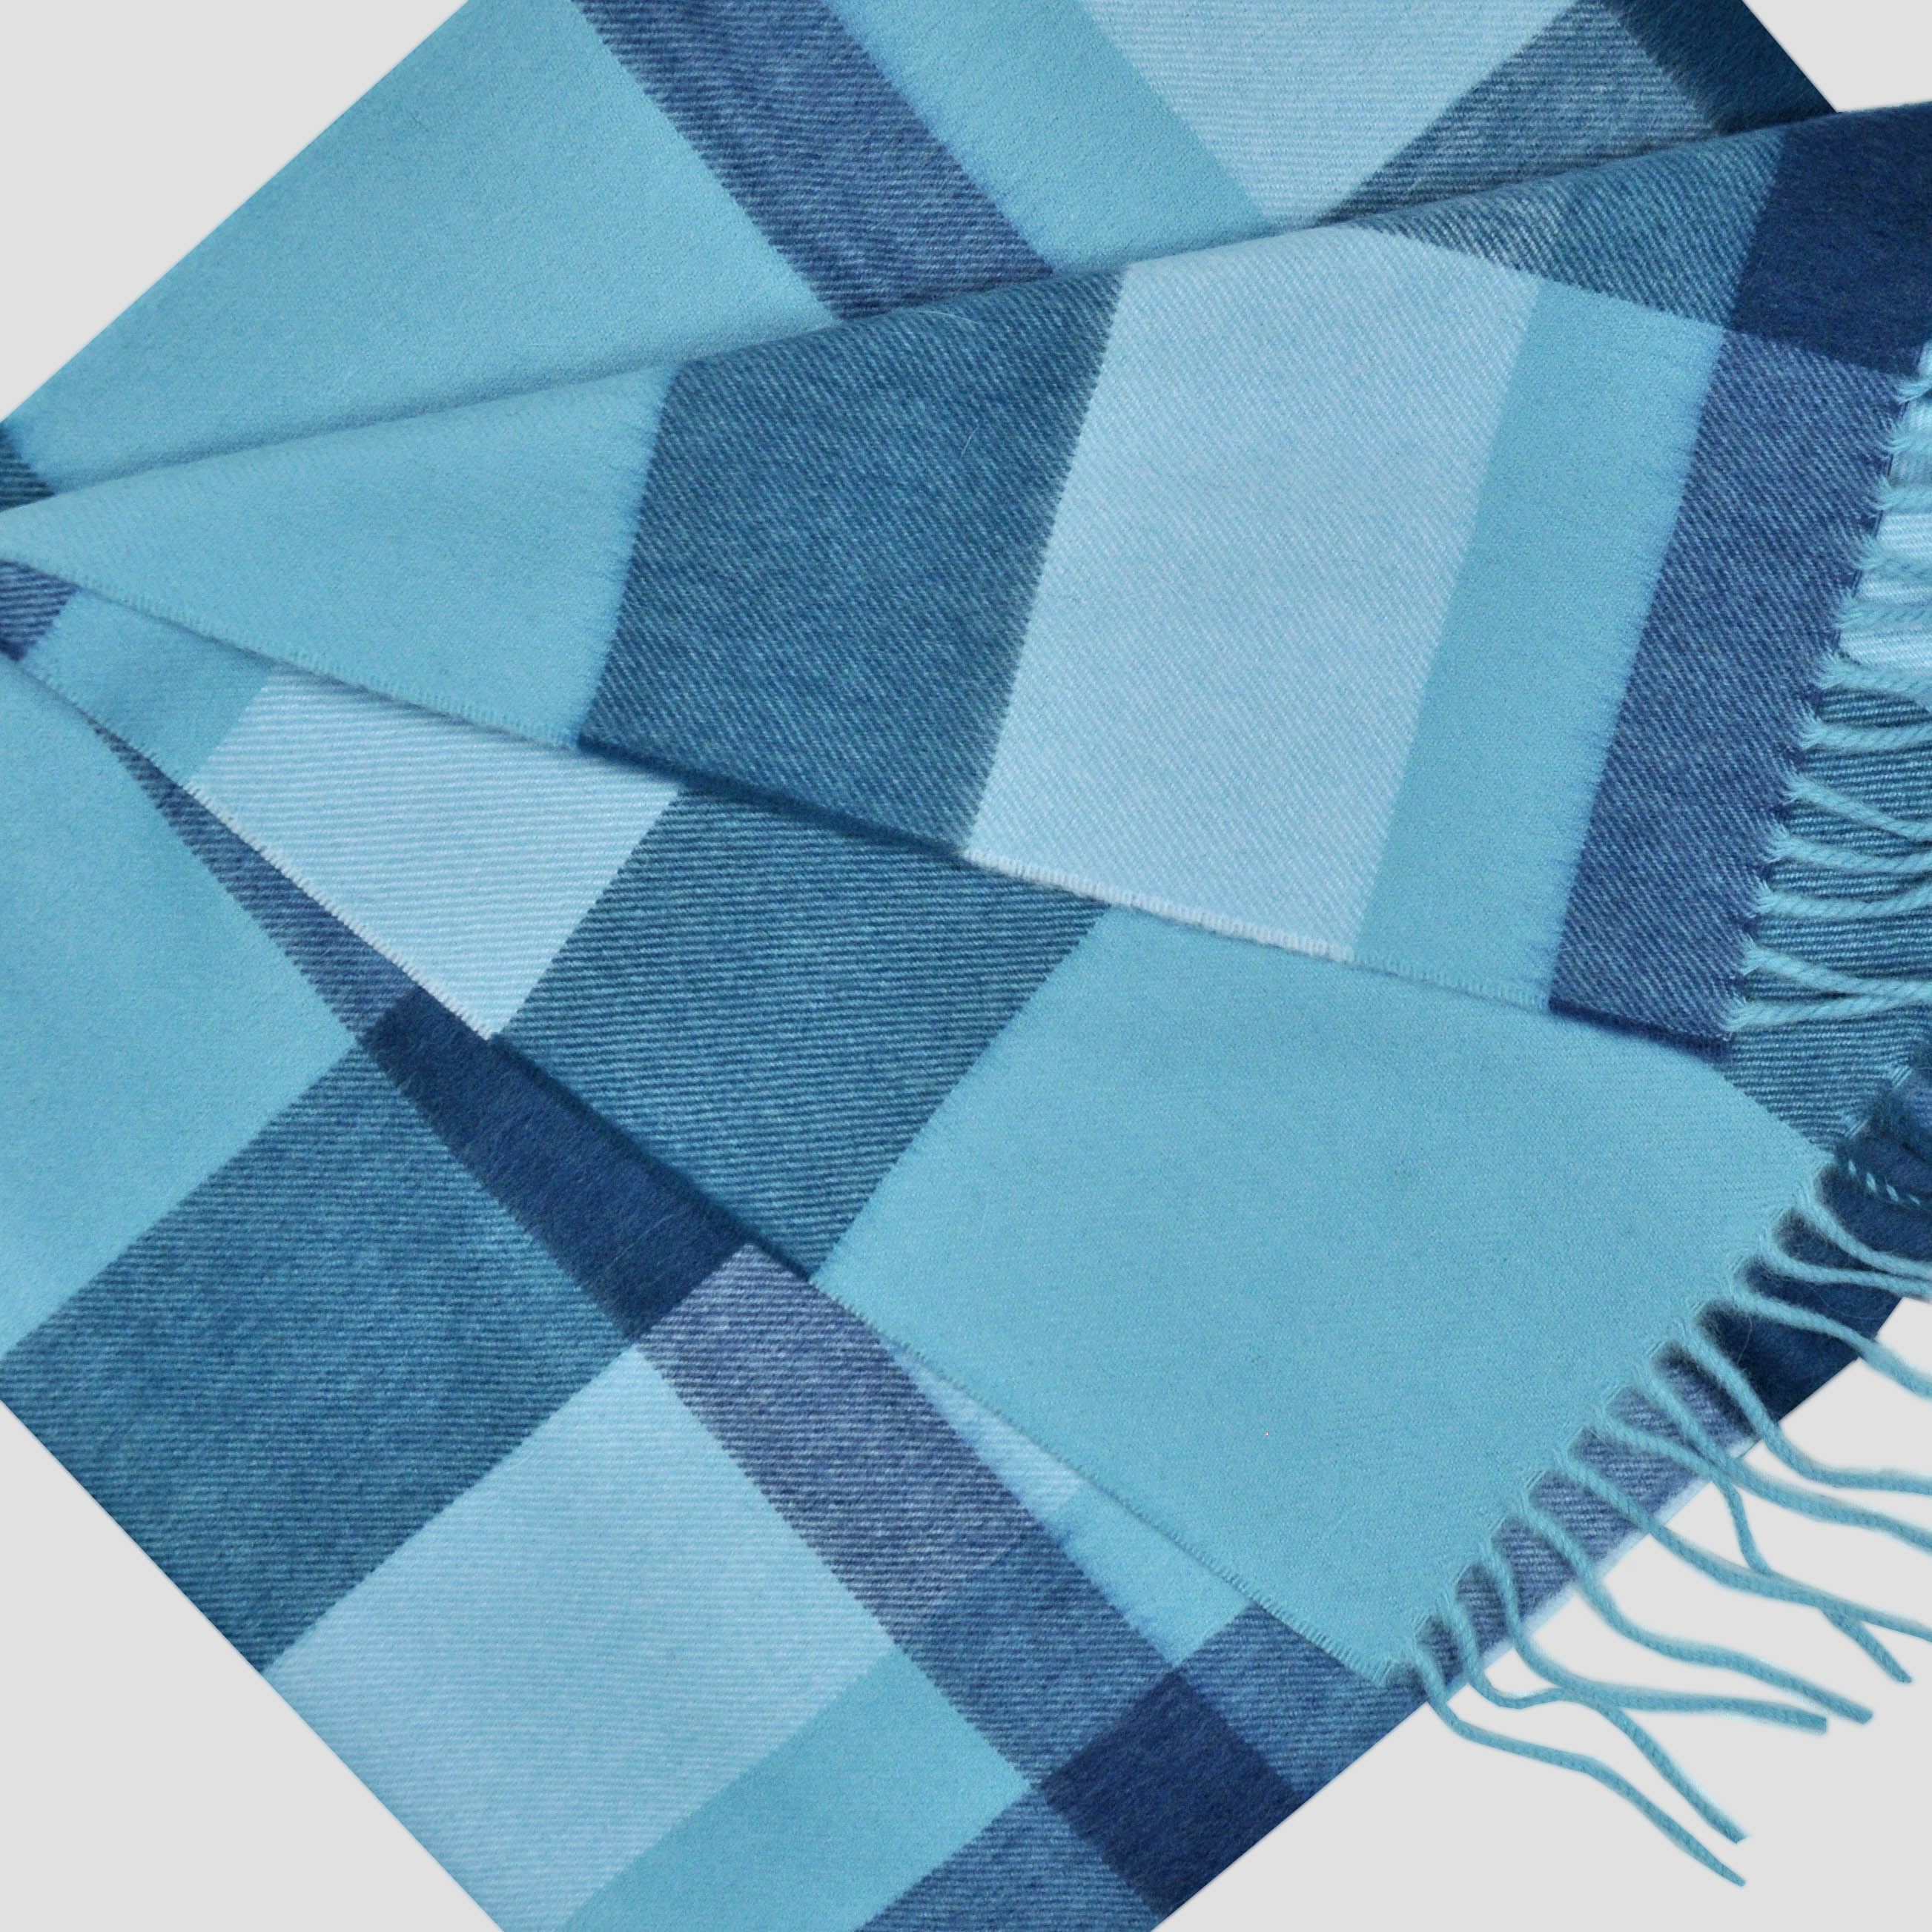 Blocks of Colour Winter Scarf in Teal & Blues